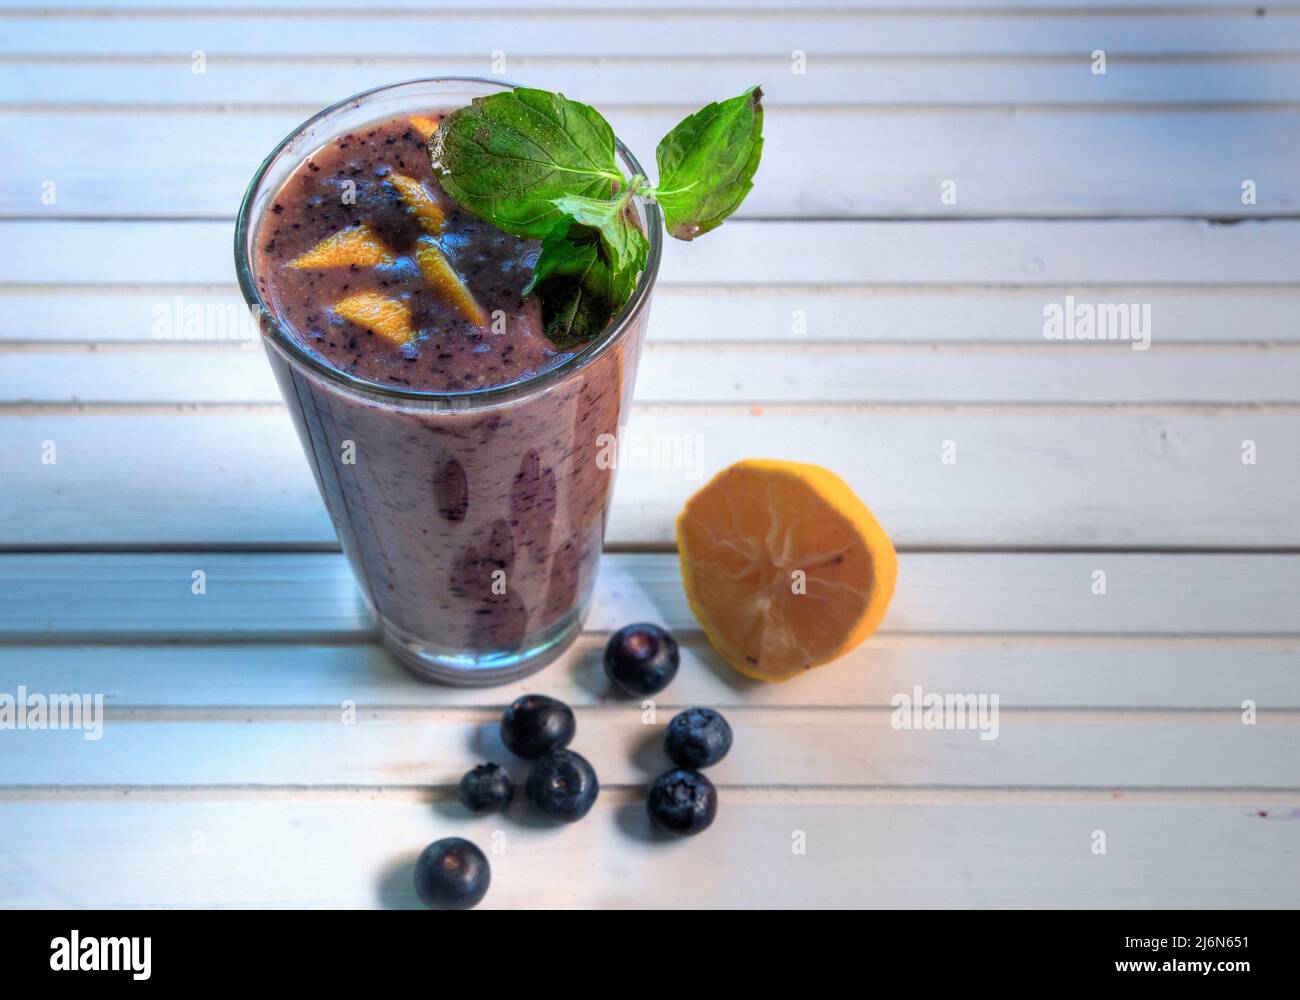 Top view of blueberry smoothies on natural white wood surface. Stock Photo